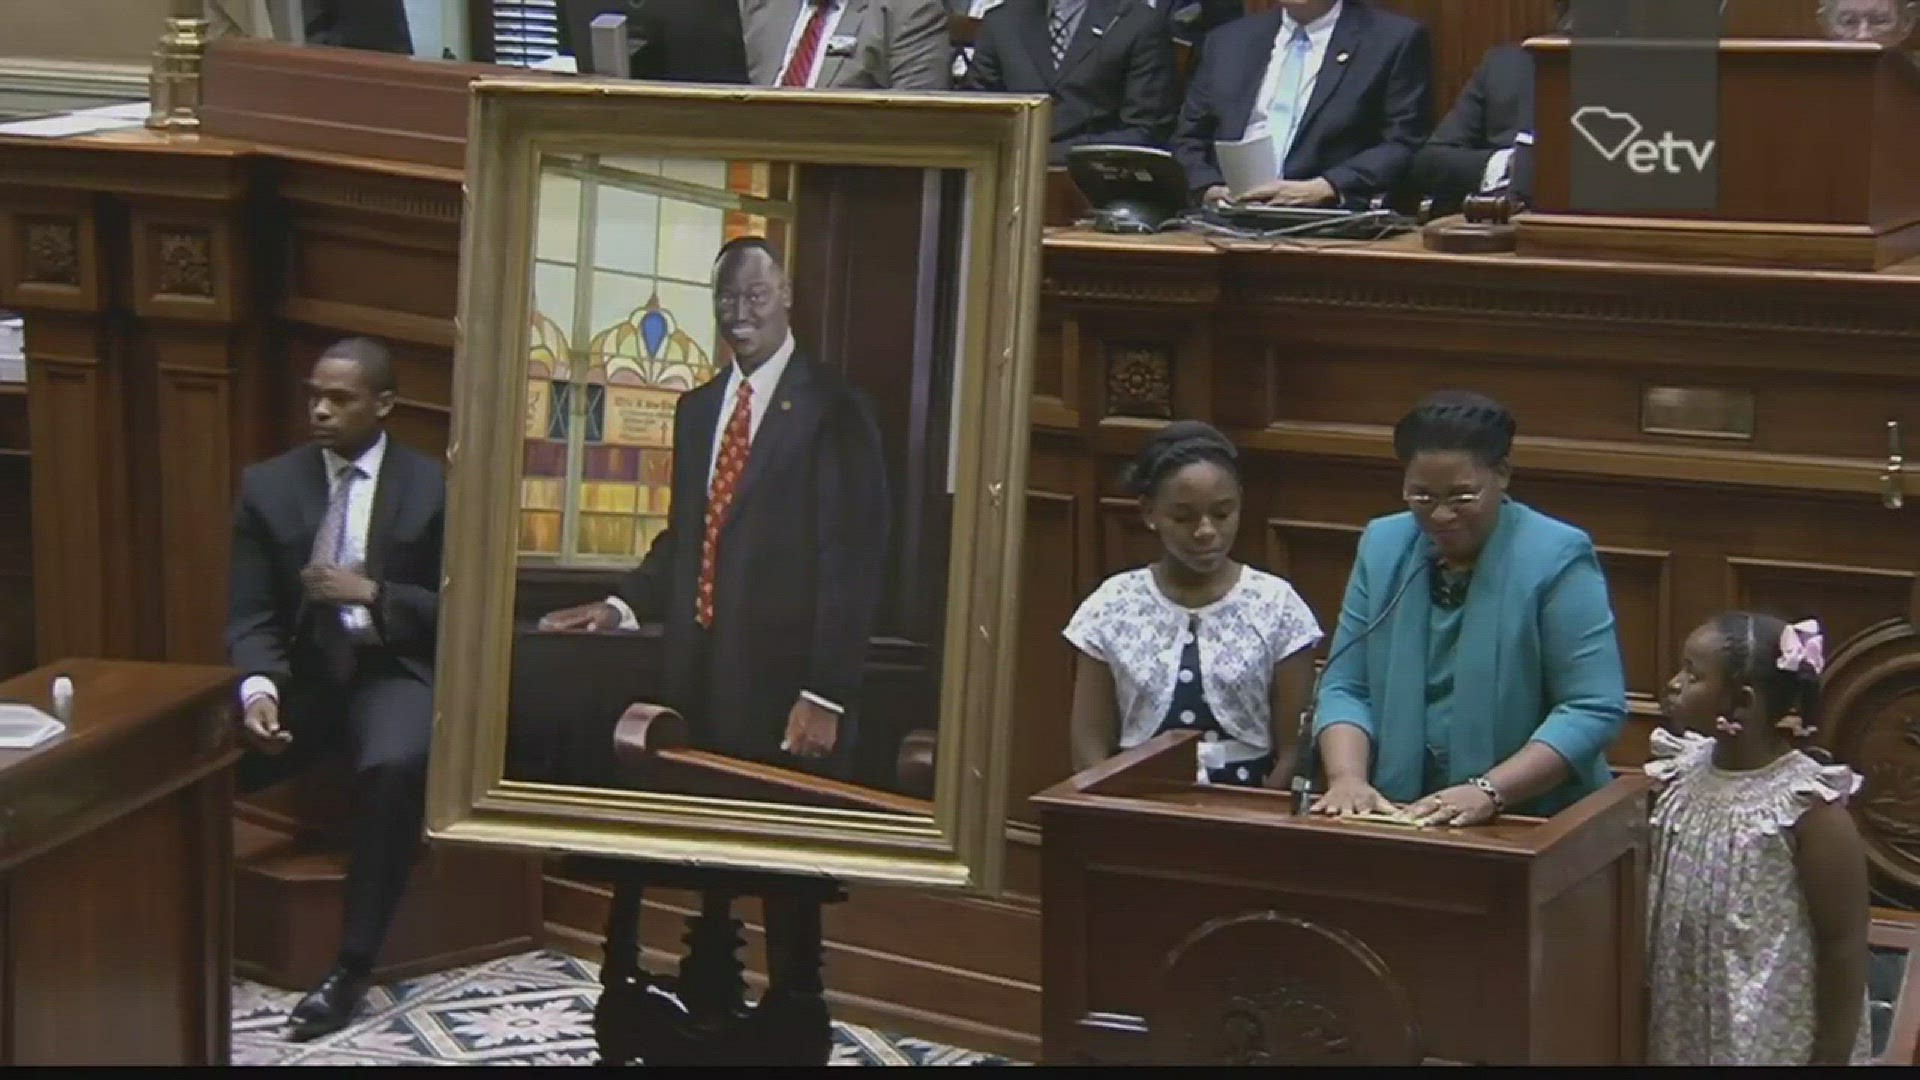 The widow of Clementa Pinckney speaks at the ceremony unveiling his Senate portrait.